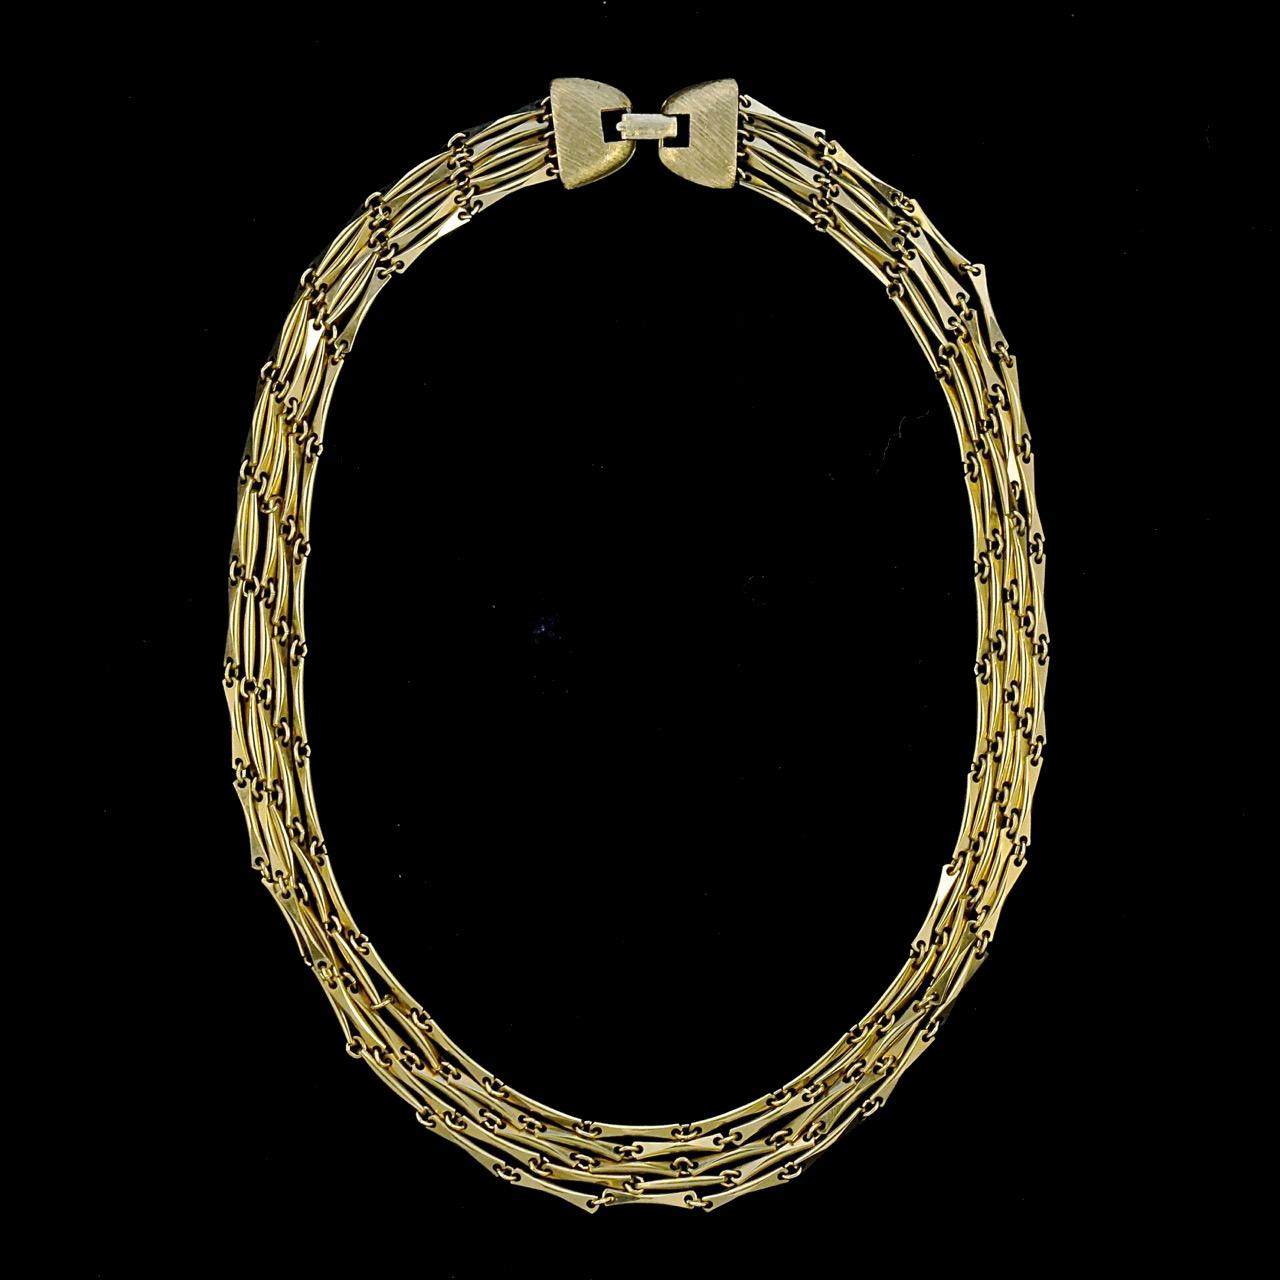 Gold Plated Five Strand Chain Link Necklace circa 1950s For Sale 3